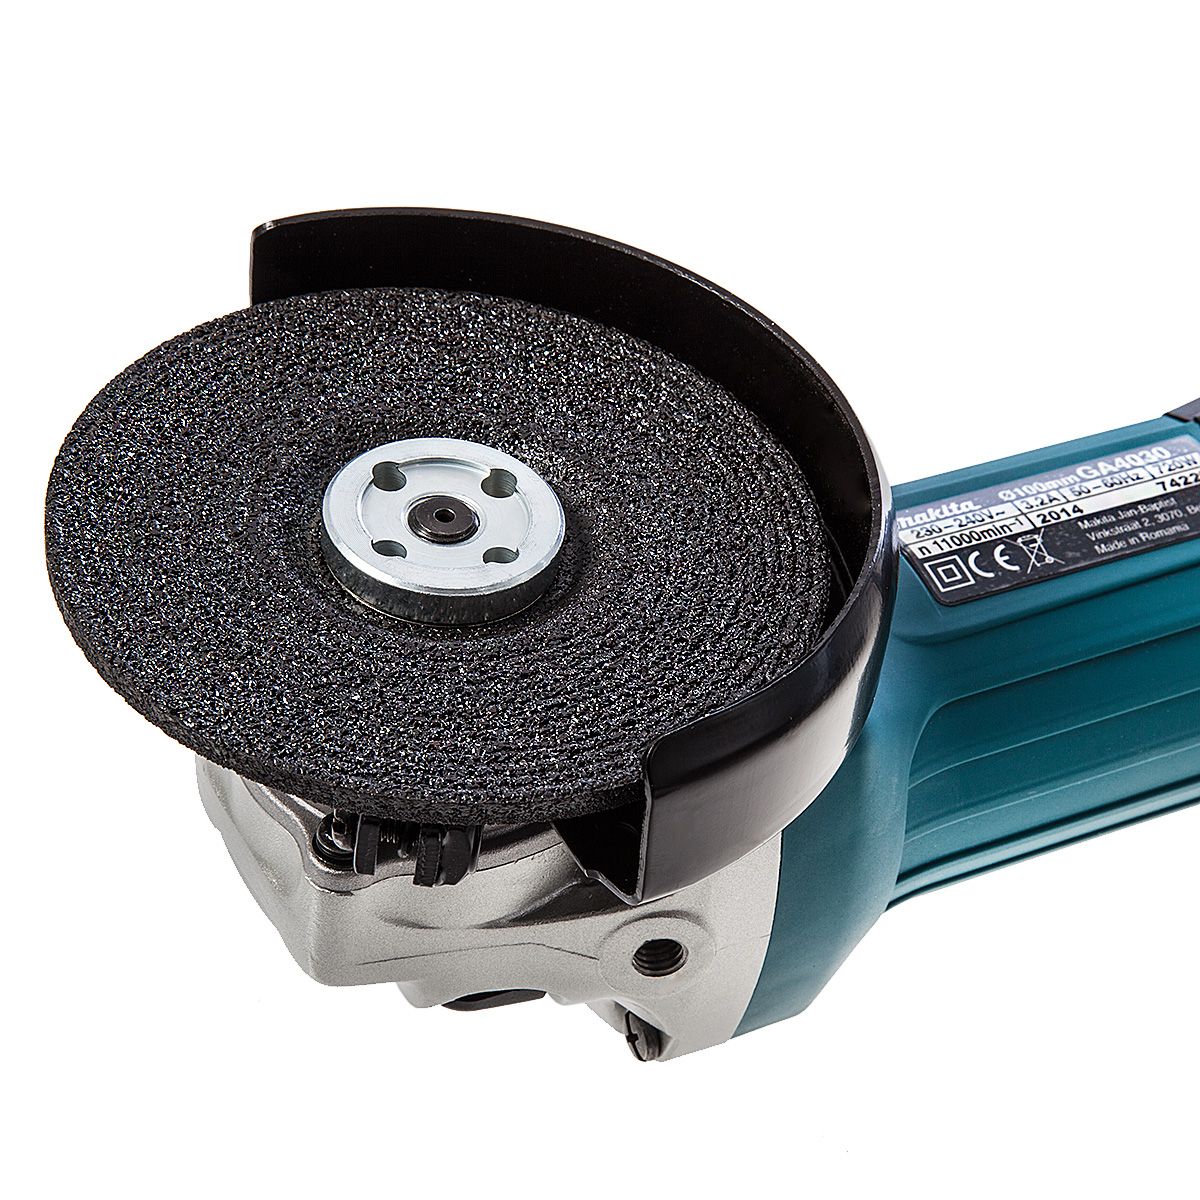 Details about   Makita 100mm 720W Angle Grinder Slide switch Ergonomic 20 degree side handle 